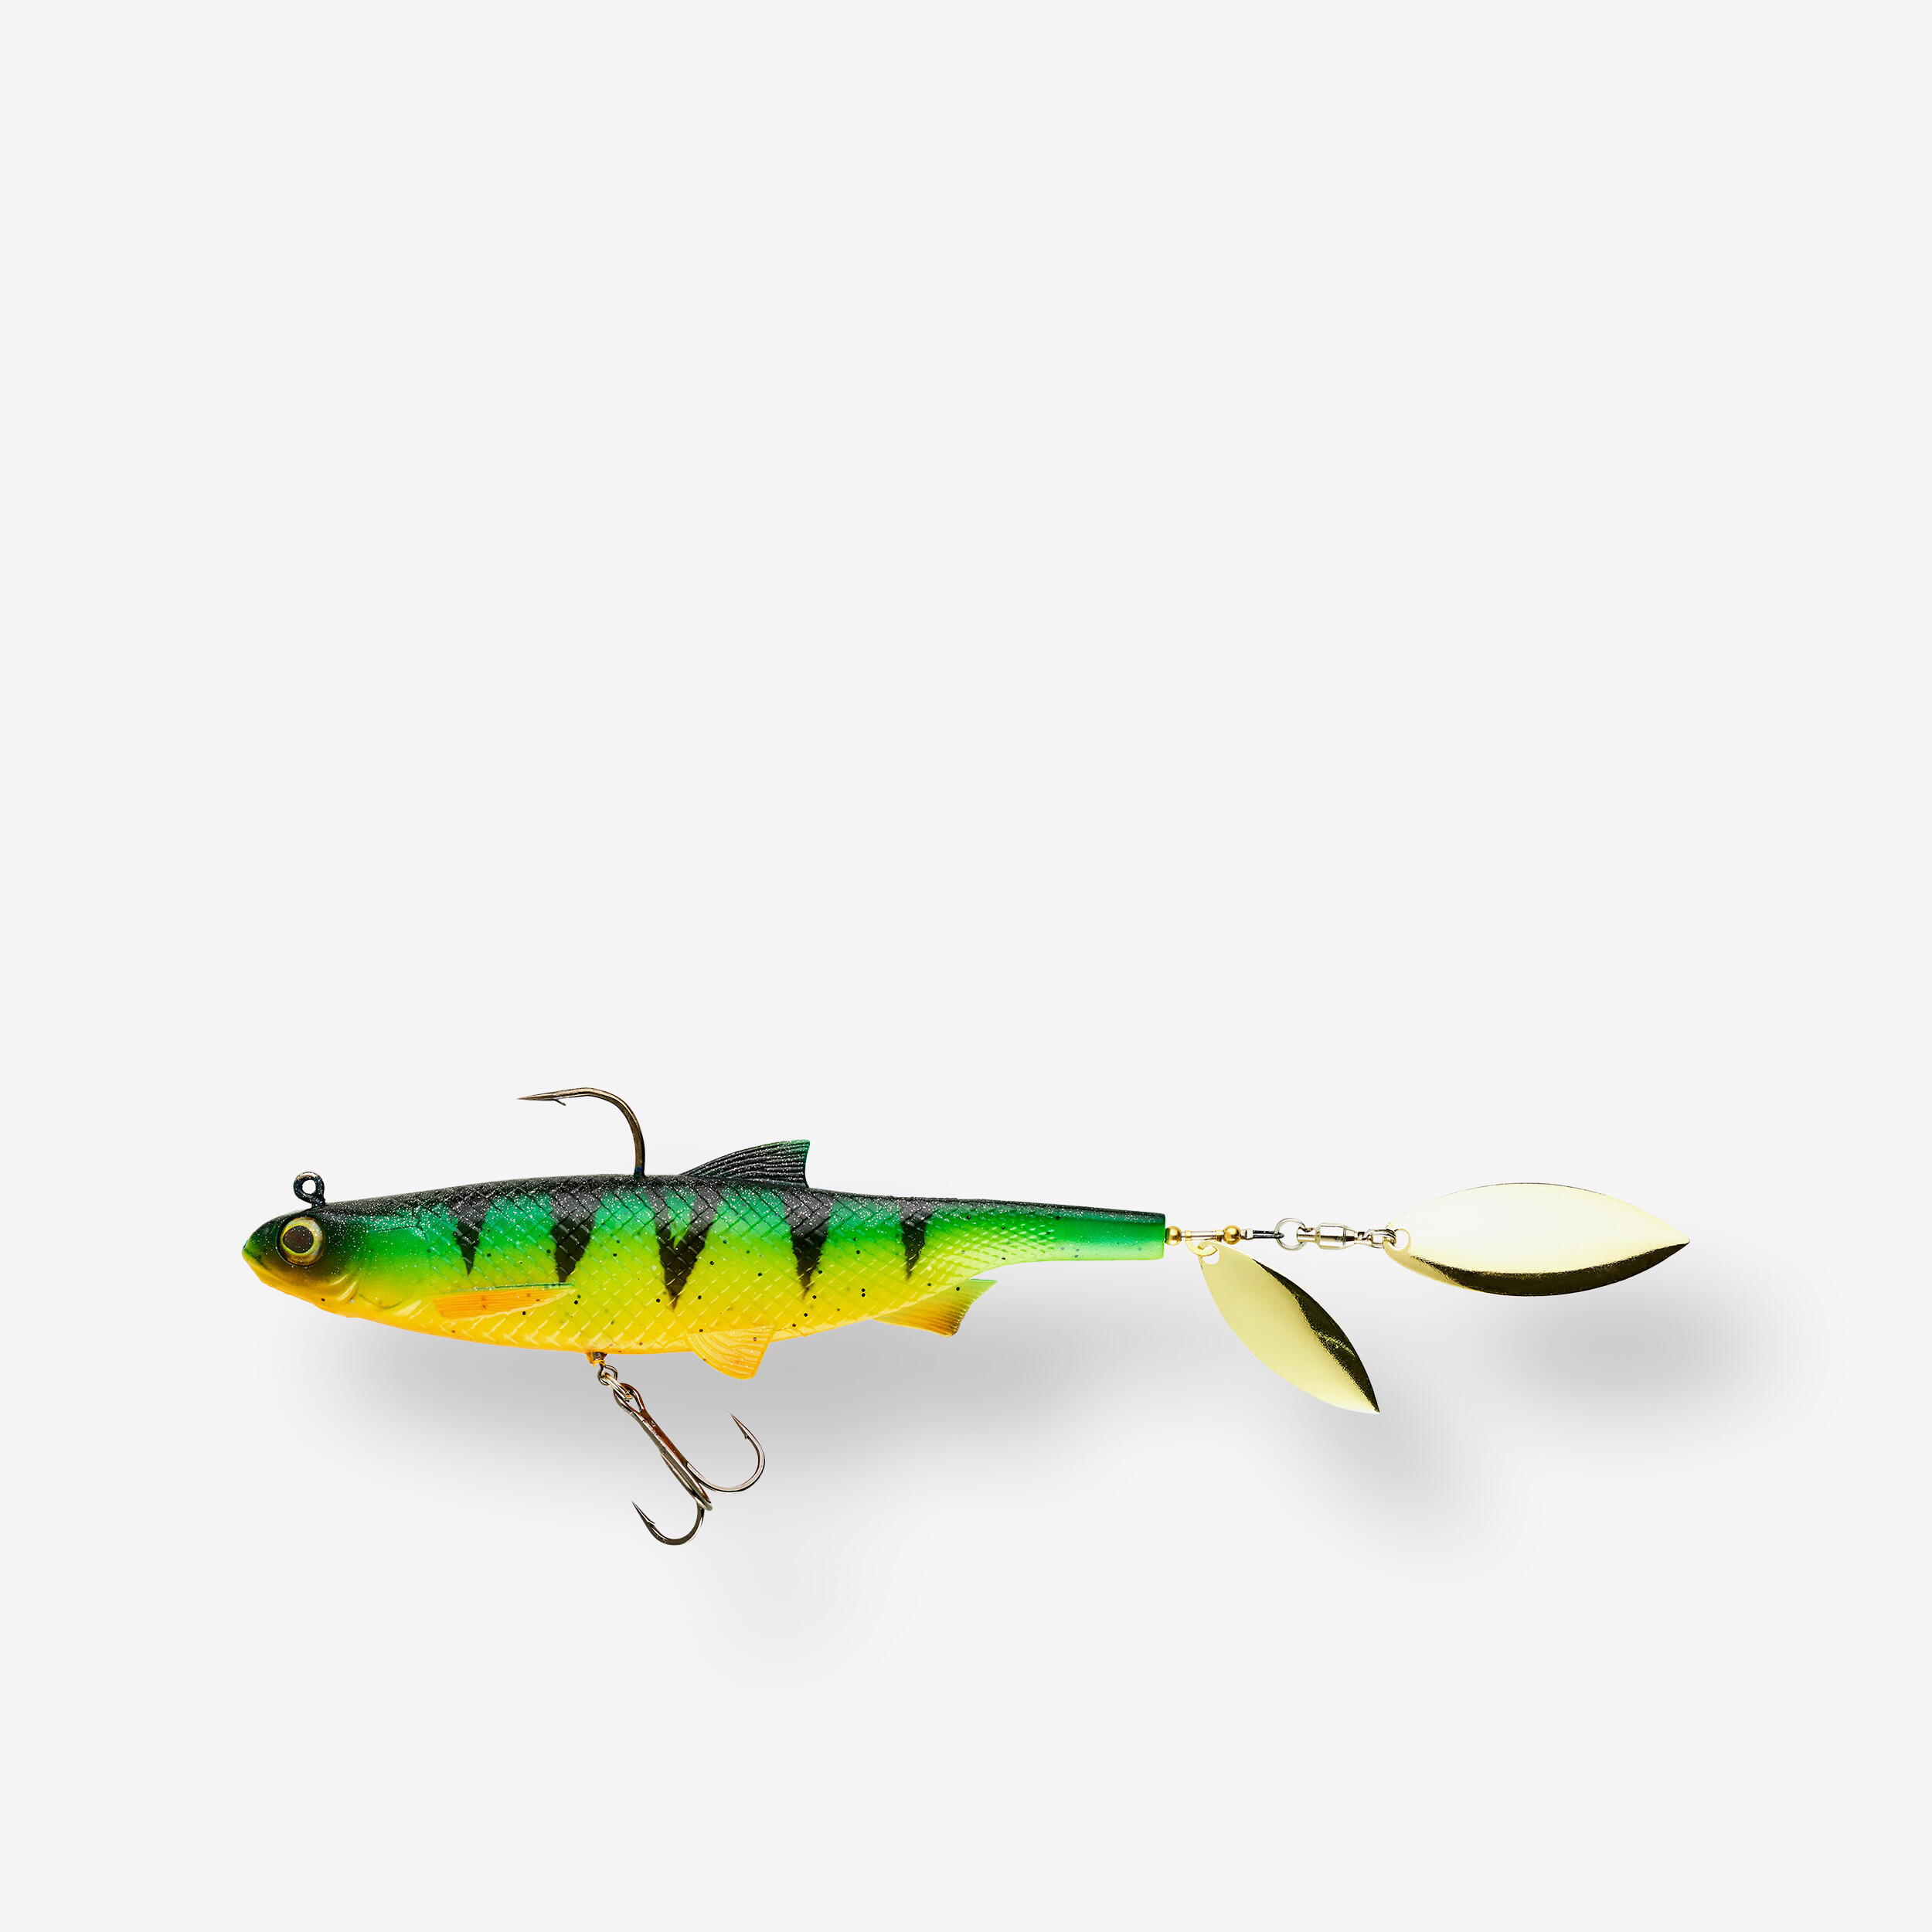 LURE FISHING ROACHSPIN 150 FIRETIGER BLADED SHAD SOFT LURE - CAPERLAN